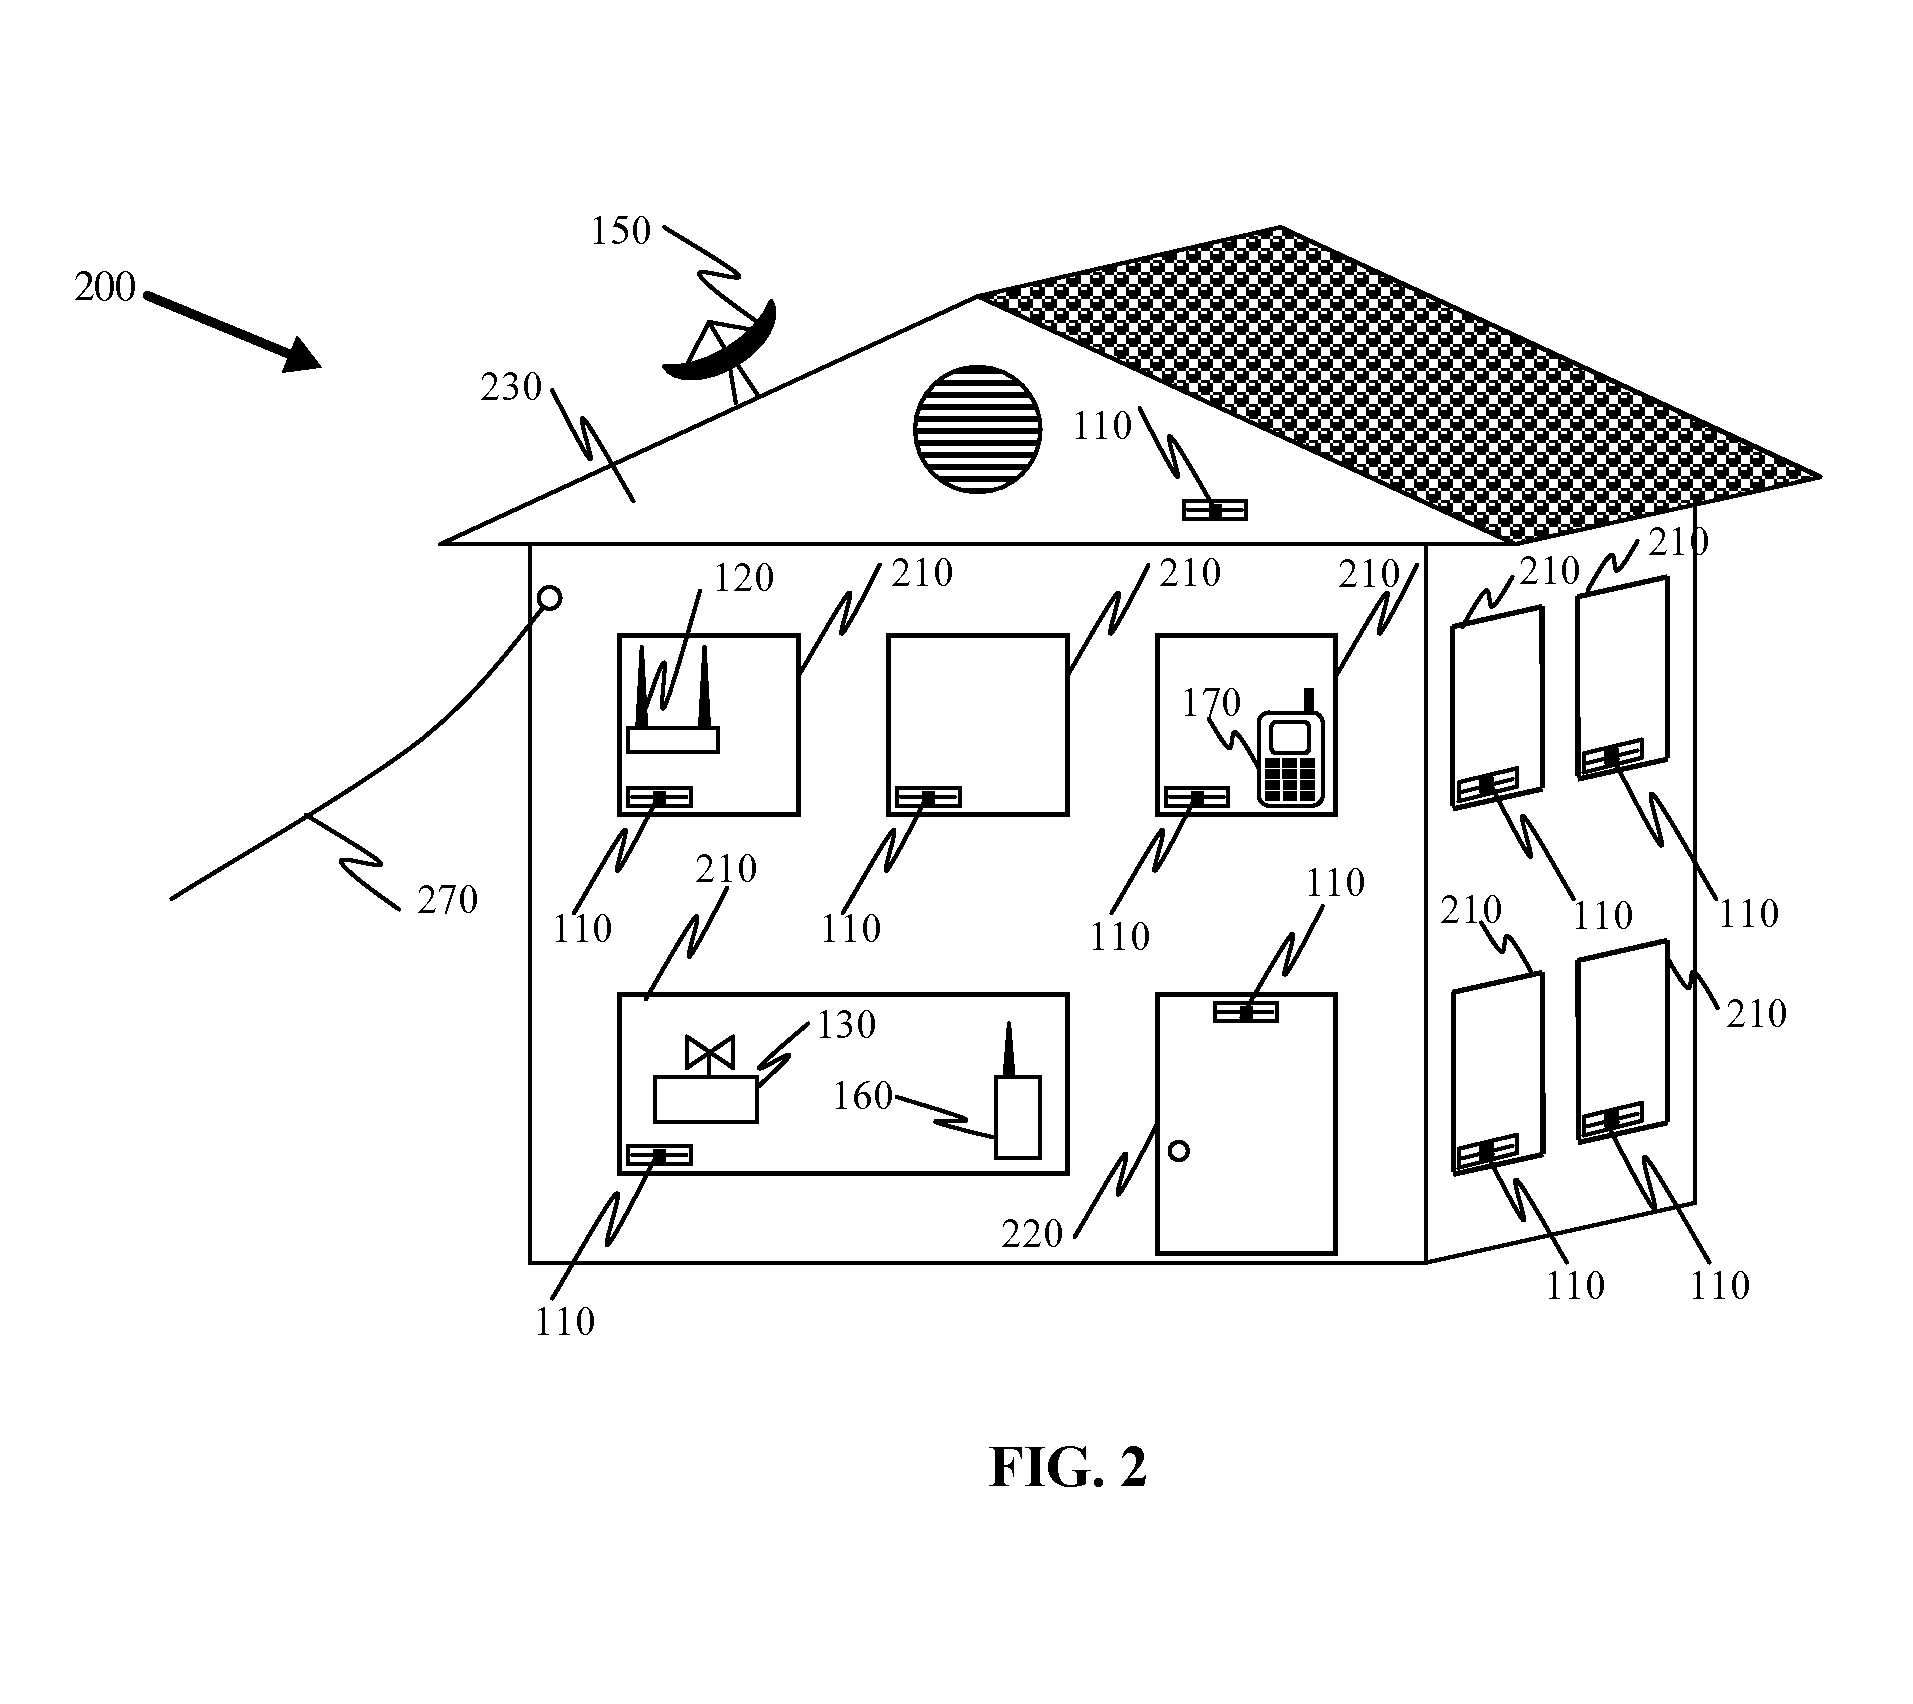 Harvesting ambient radio frequency electromagnetic energy for powering wireless electronic devices, sensors and sensor networks and applications thereof